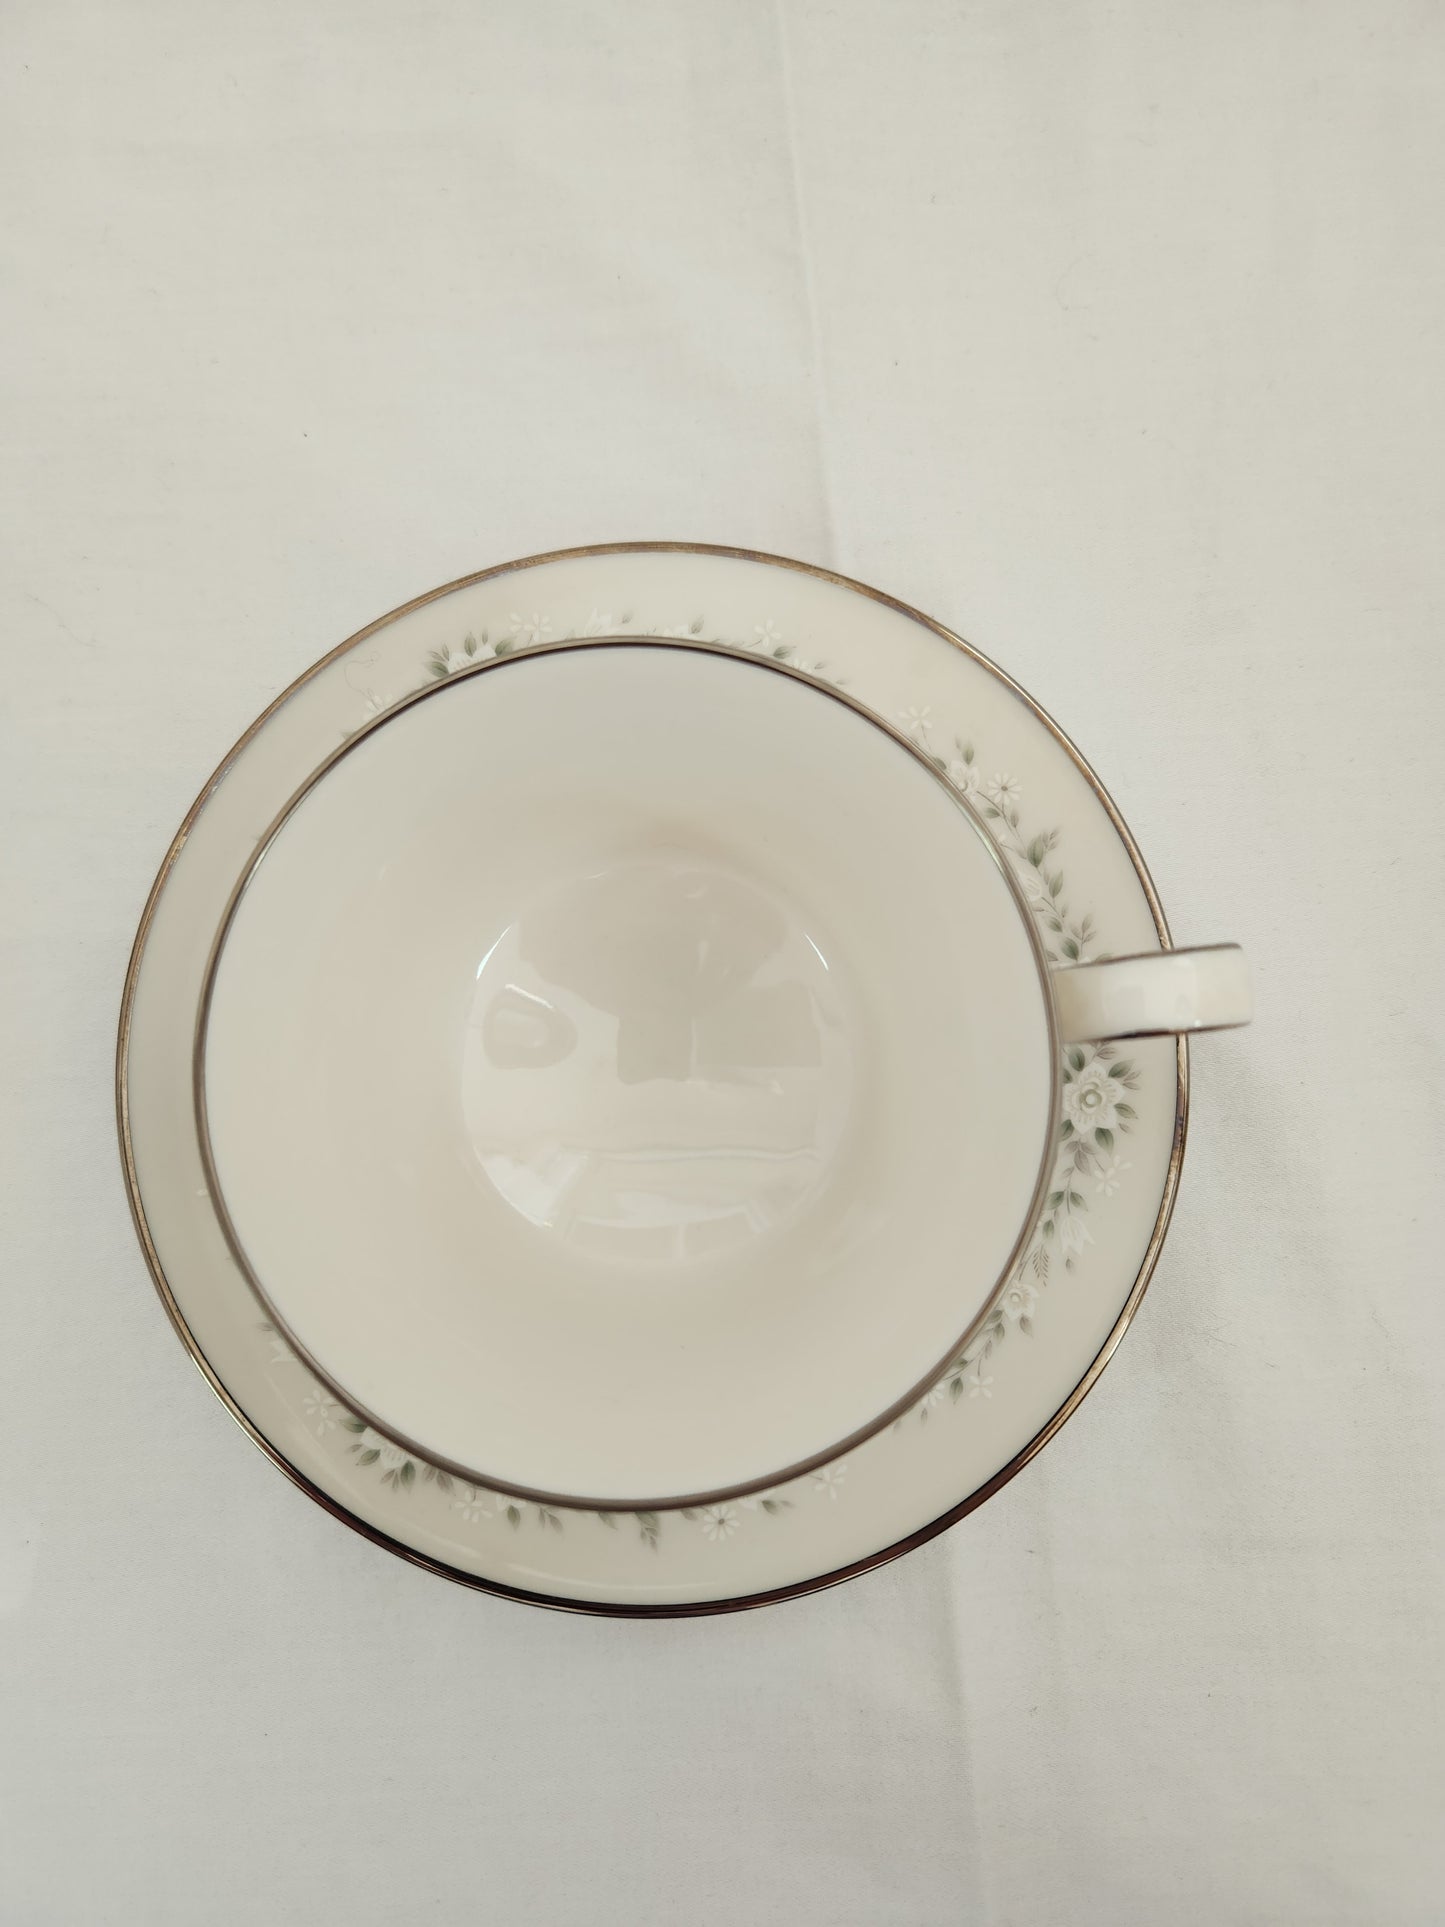 Noritake - Heather 7548 Footed Cup & Saucer Set